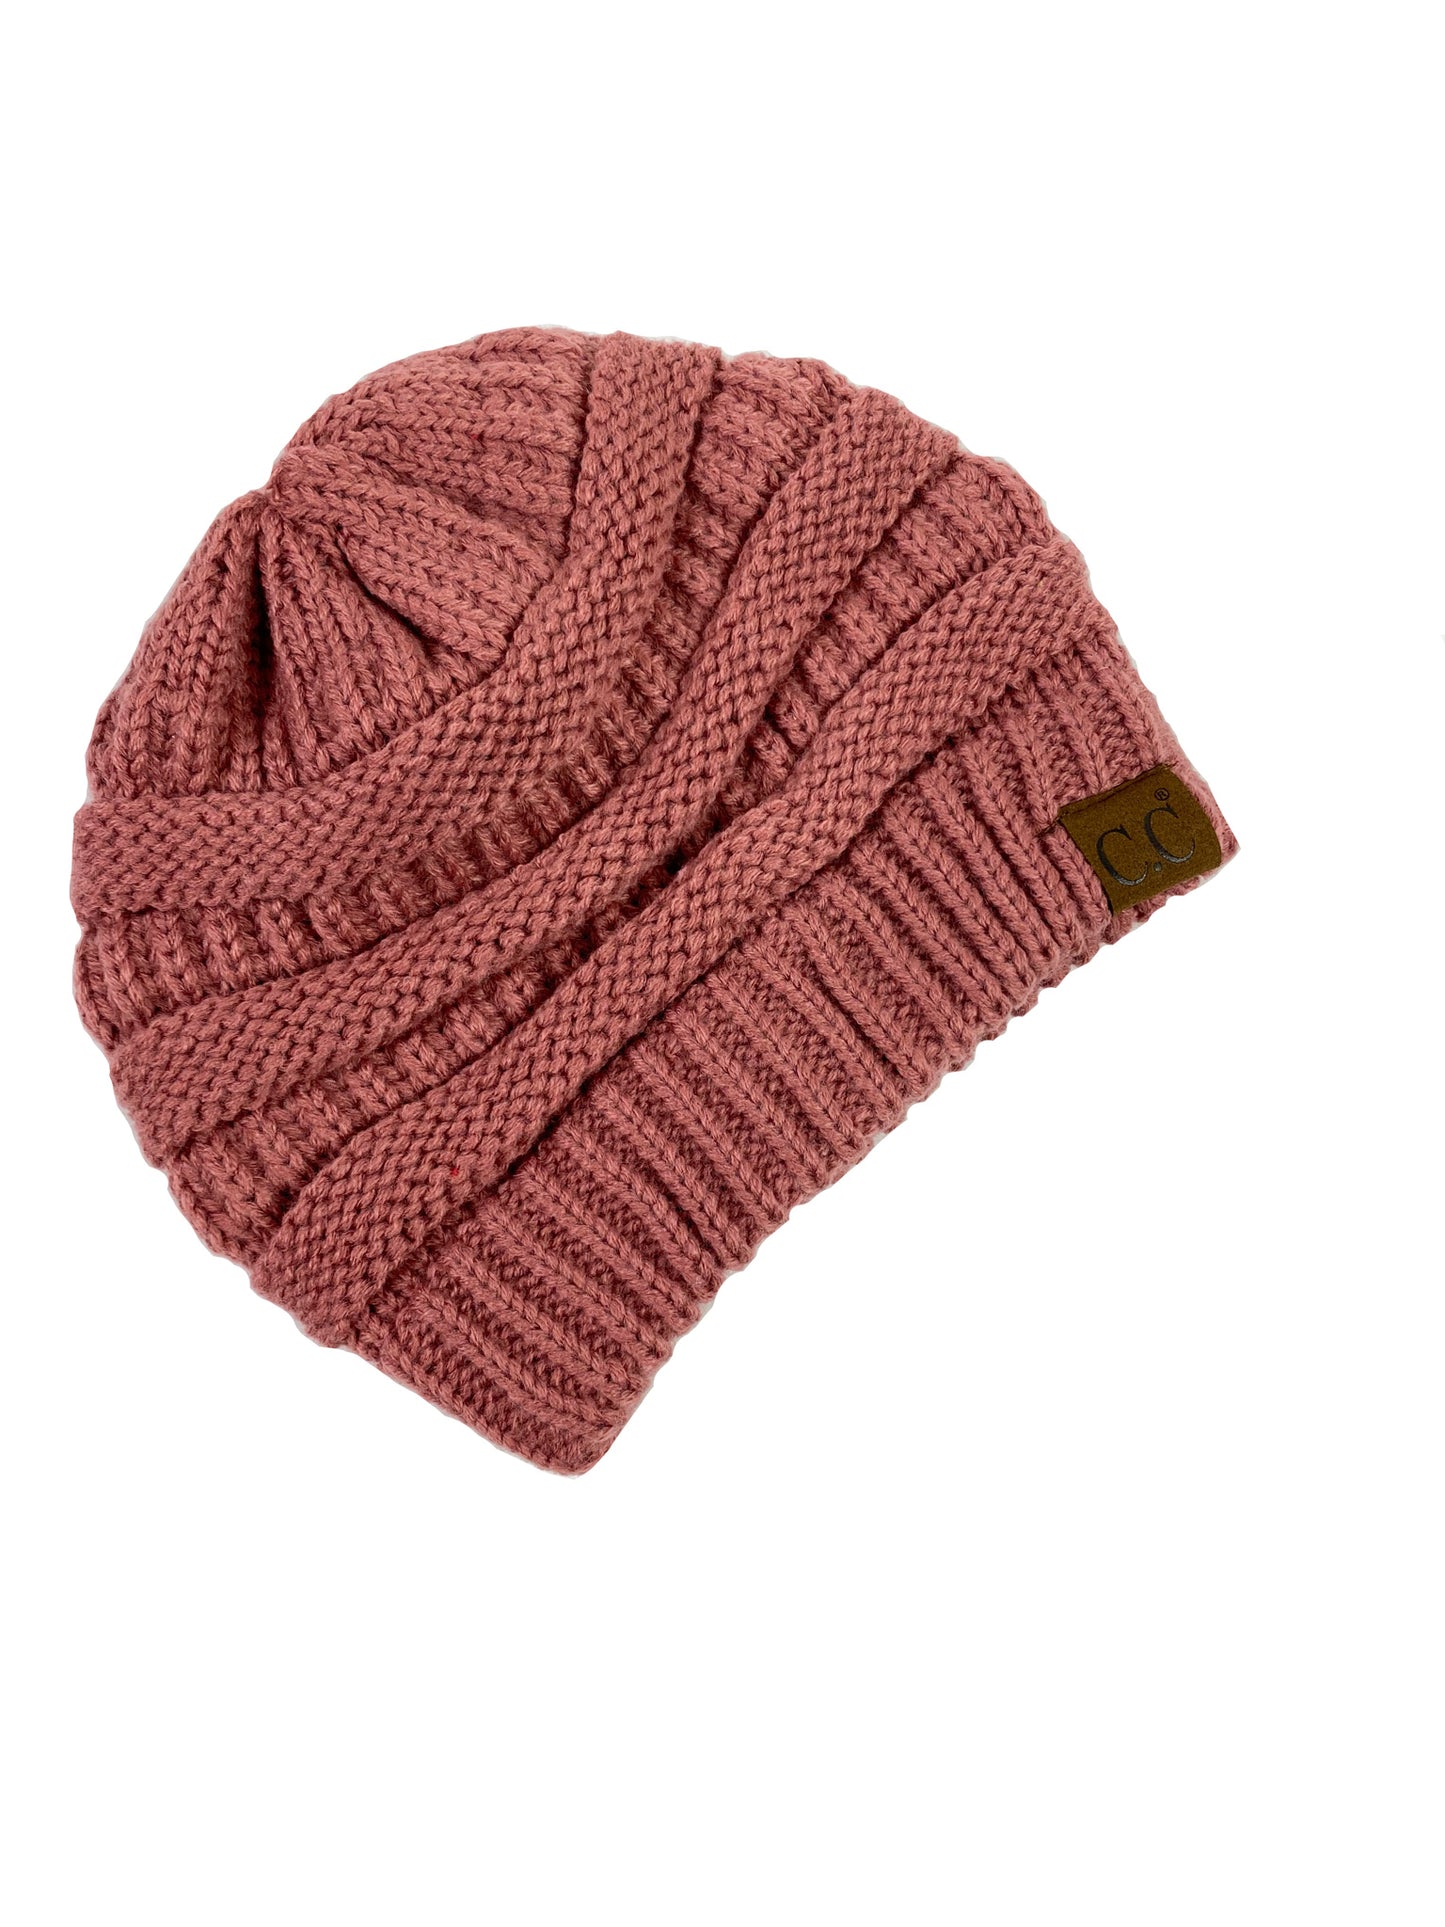 C.C Classic Beanies for Adults, Winter Hats, Winter Beanies, Premium Hats, Warm Hats, Winter Accessories, CC Beanies. One size fits all. Comes in mustard, maroon, red, and pink.